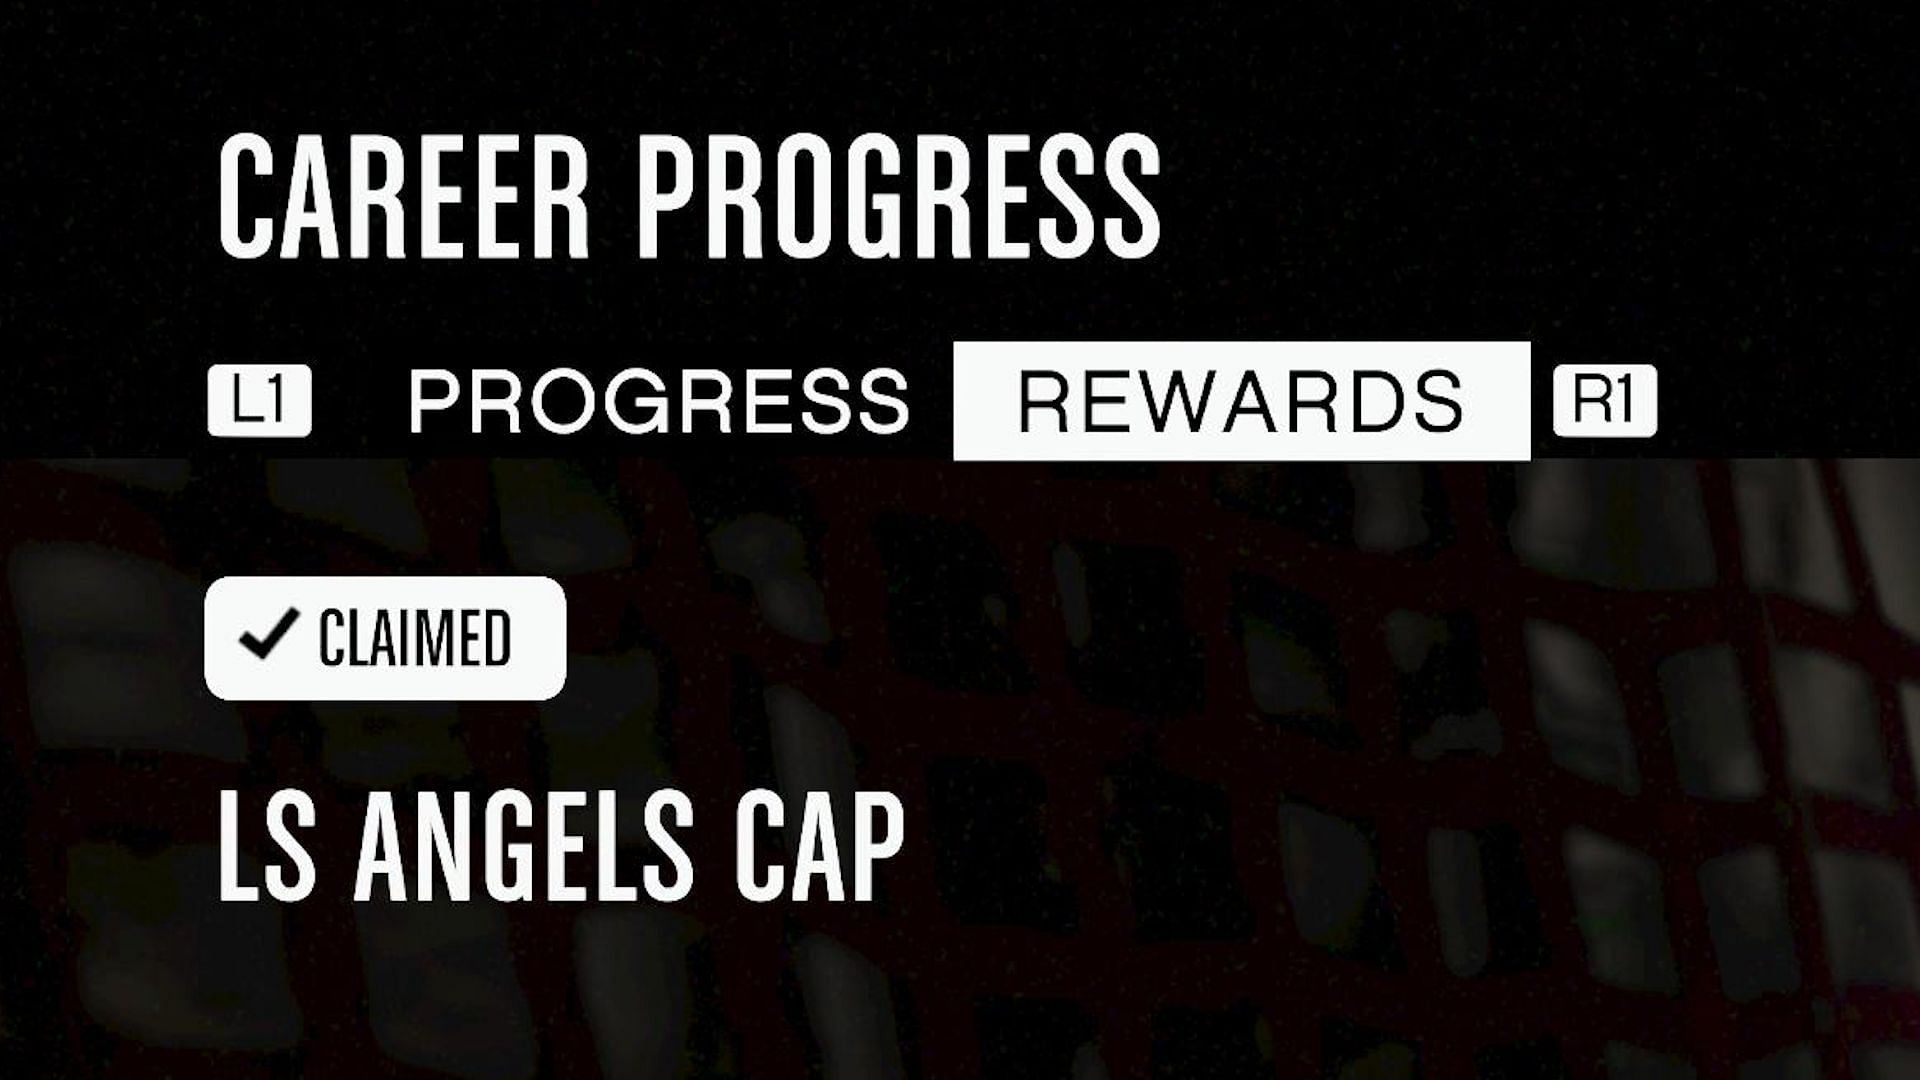 An example of how to access the Rewards (Image via Rockstar Games)